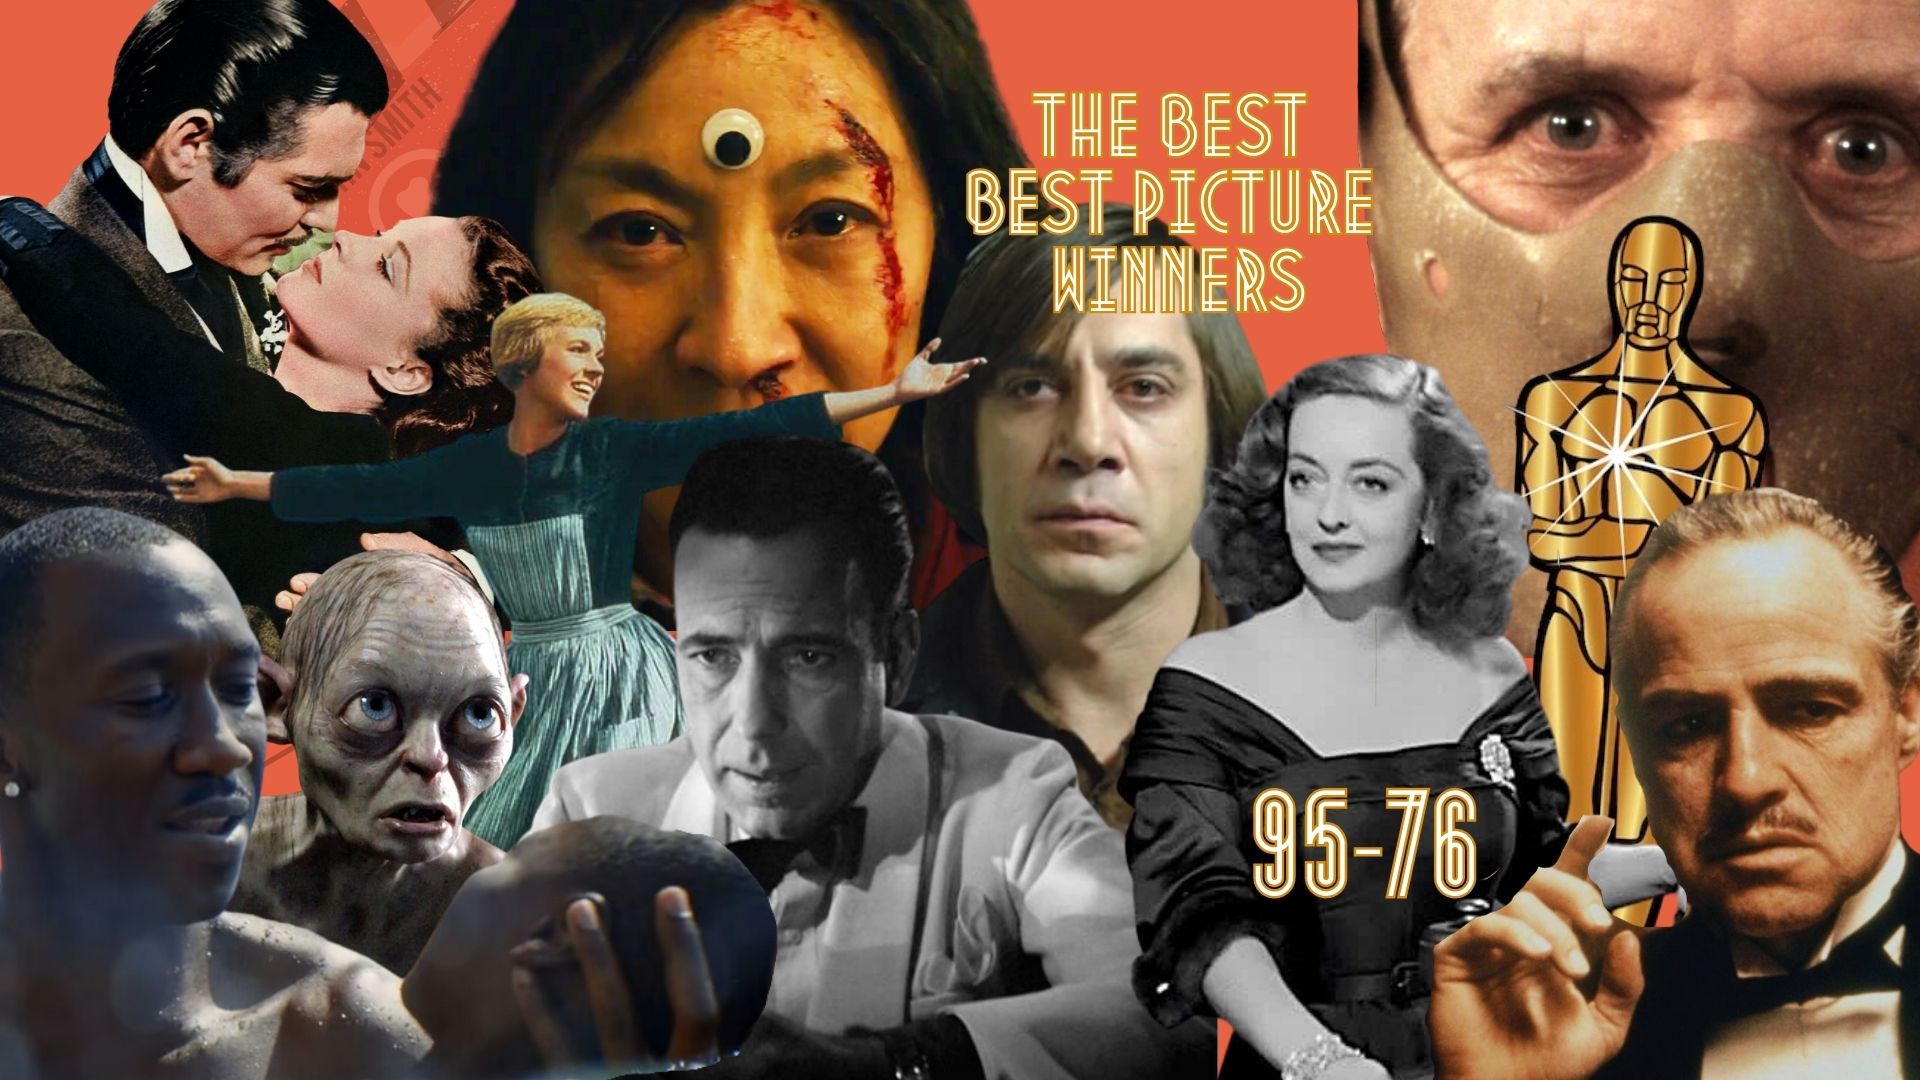 2021 Oscars Best Picture Nominees Ranked